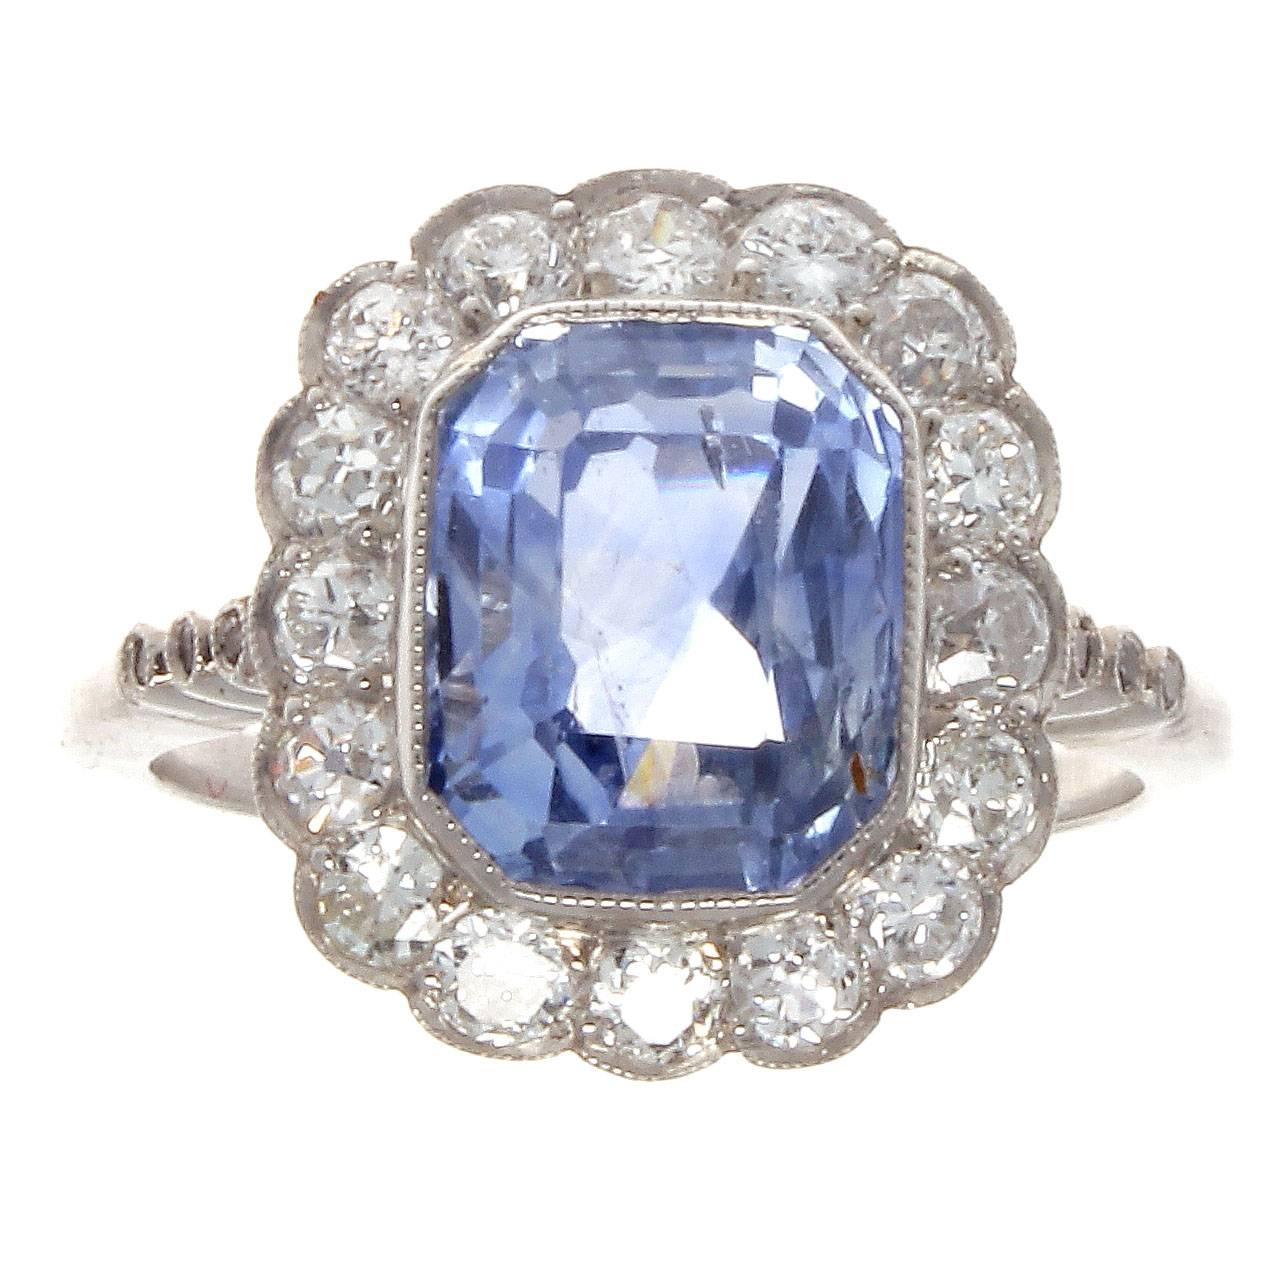 The forever in style halo ring dating all the way back to the early 1800's. Featuring a 4.32 carat sapphire that exudes the sought after cornflower blue from the Ceylon region. Surrounded by 16 old European cut diamonds that are F-G color, VS